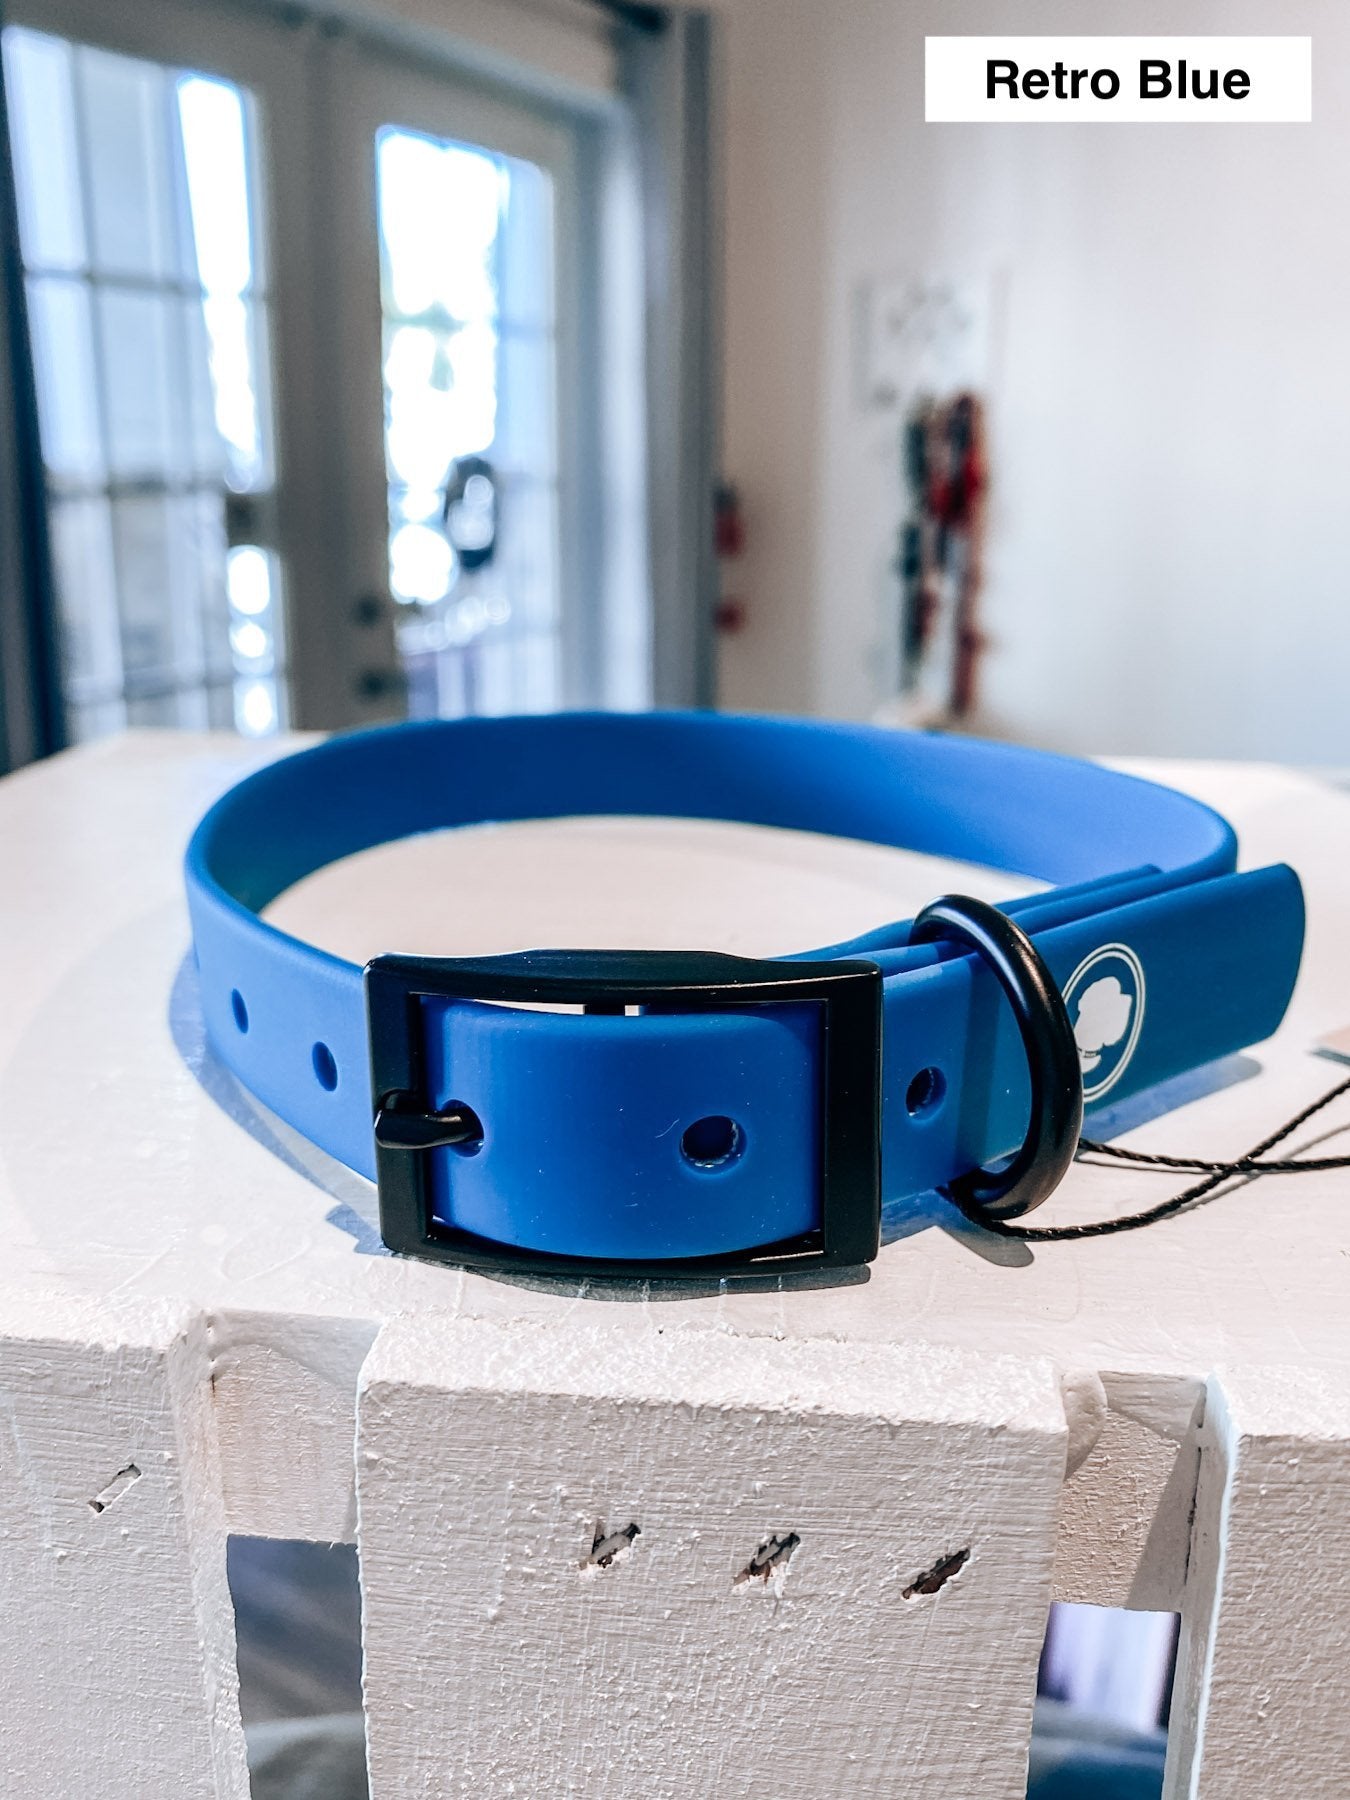 This Modern Dog Collar Has a Simple Aesthetic for Your Pup